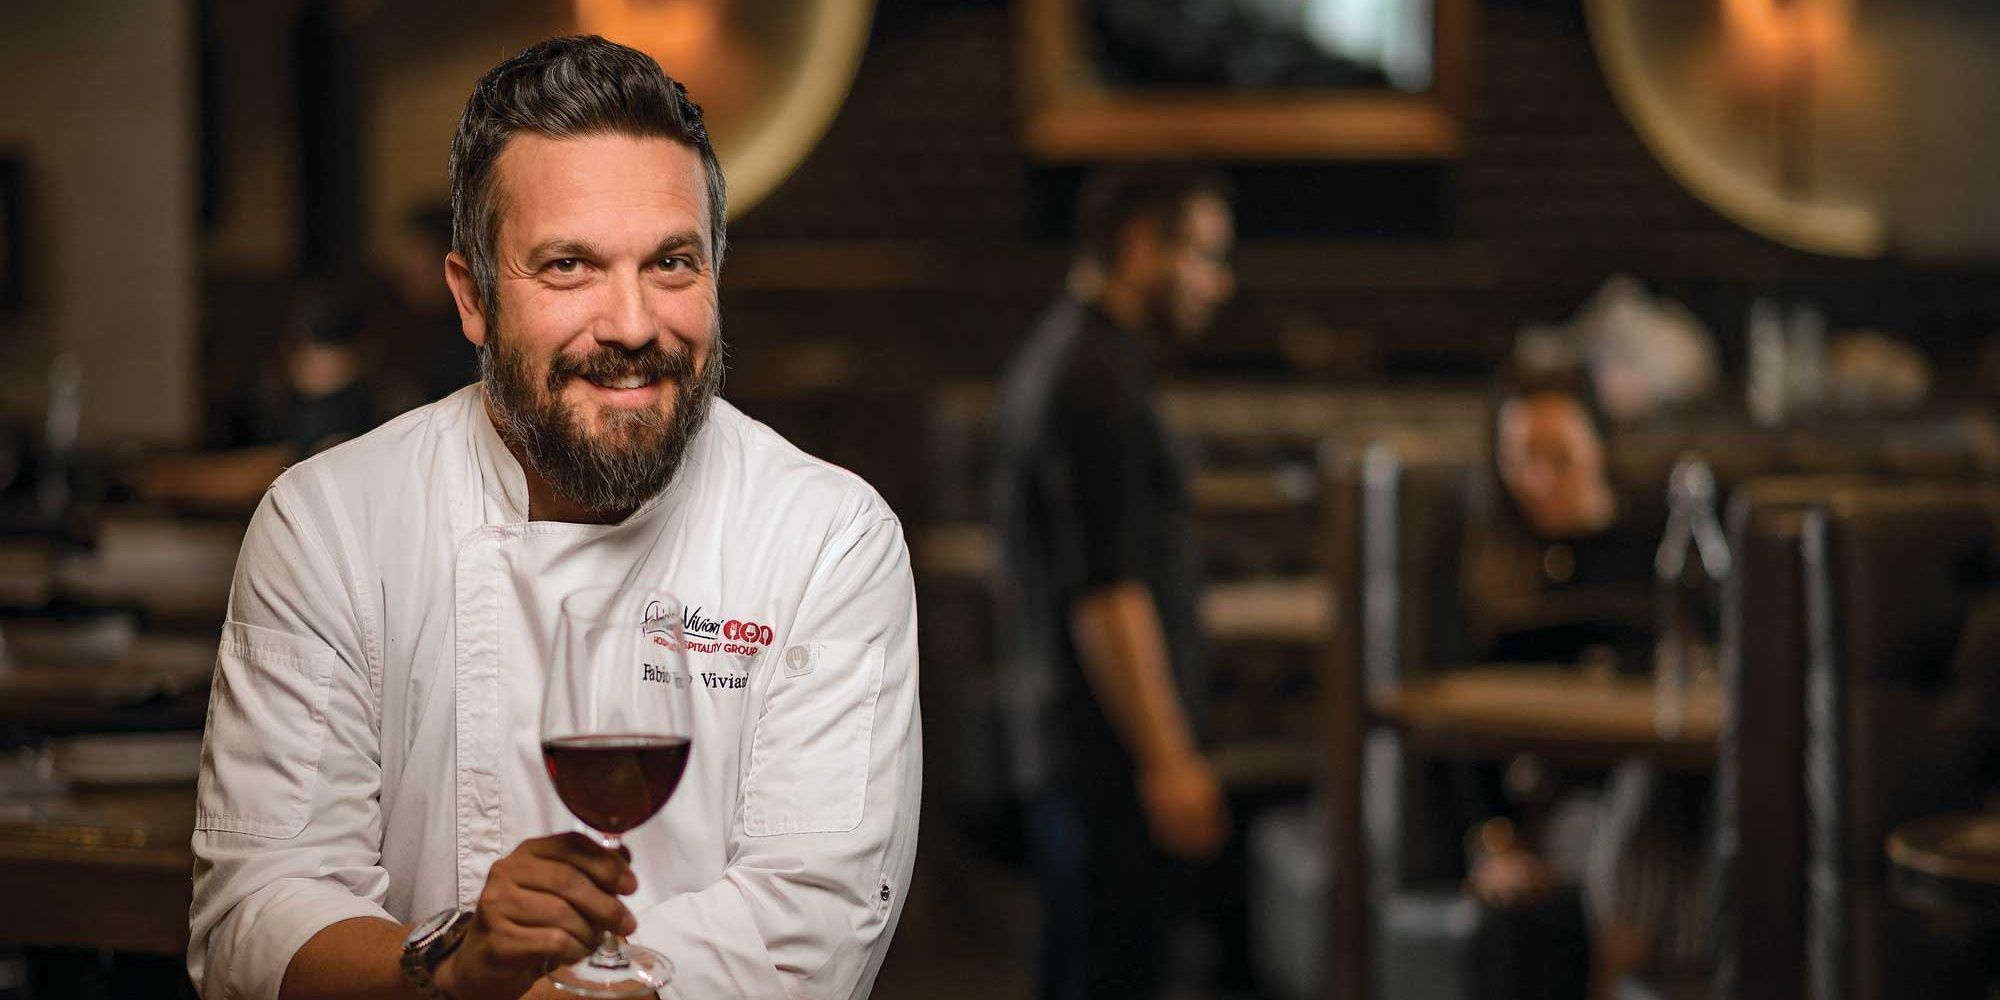 Fabio Viviani smiling while holding a glass of wine